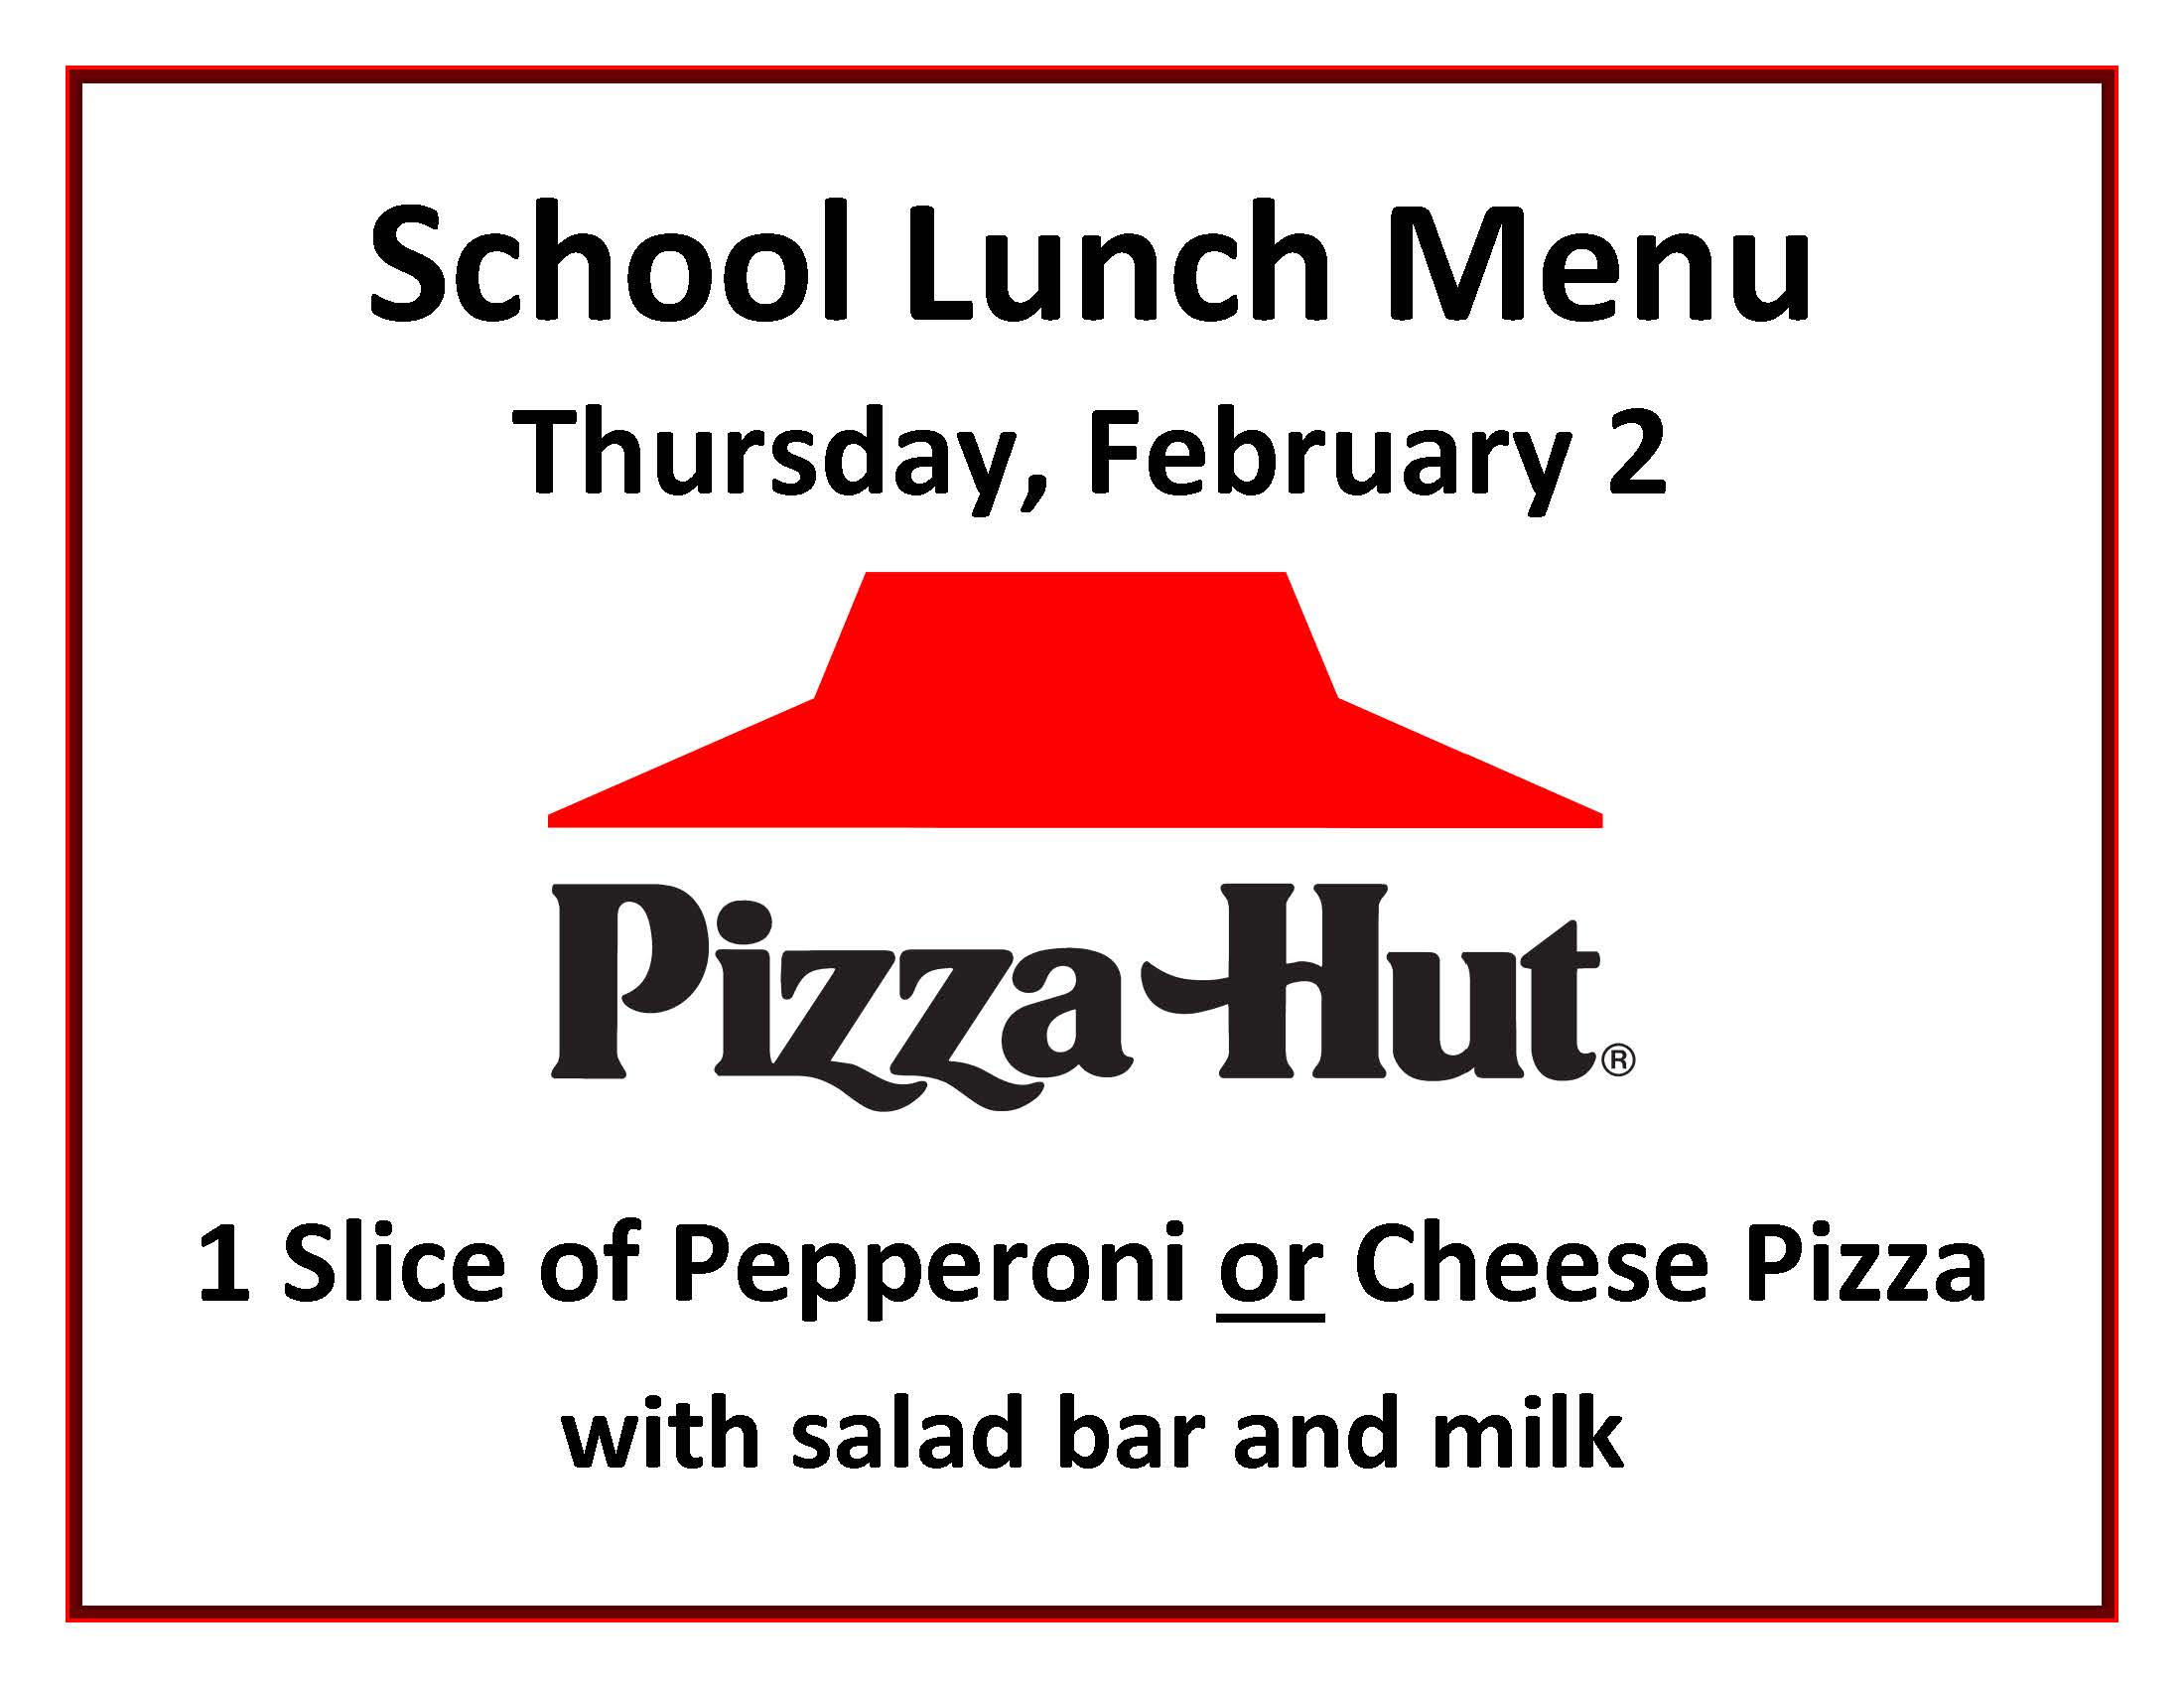 Pizza Hut Day in the school cafeteria